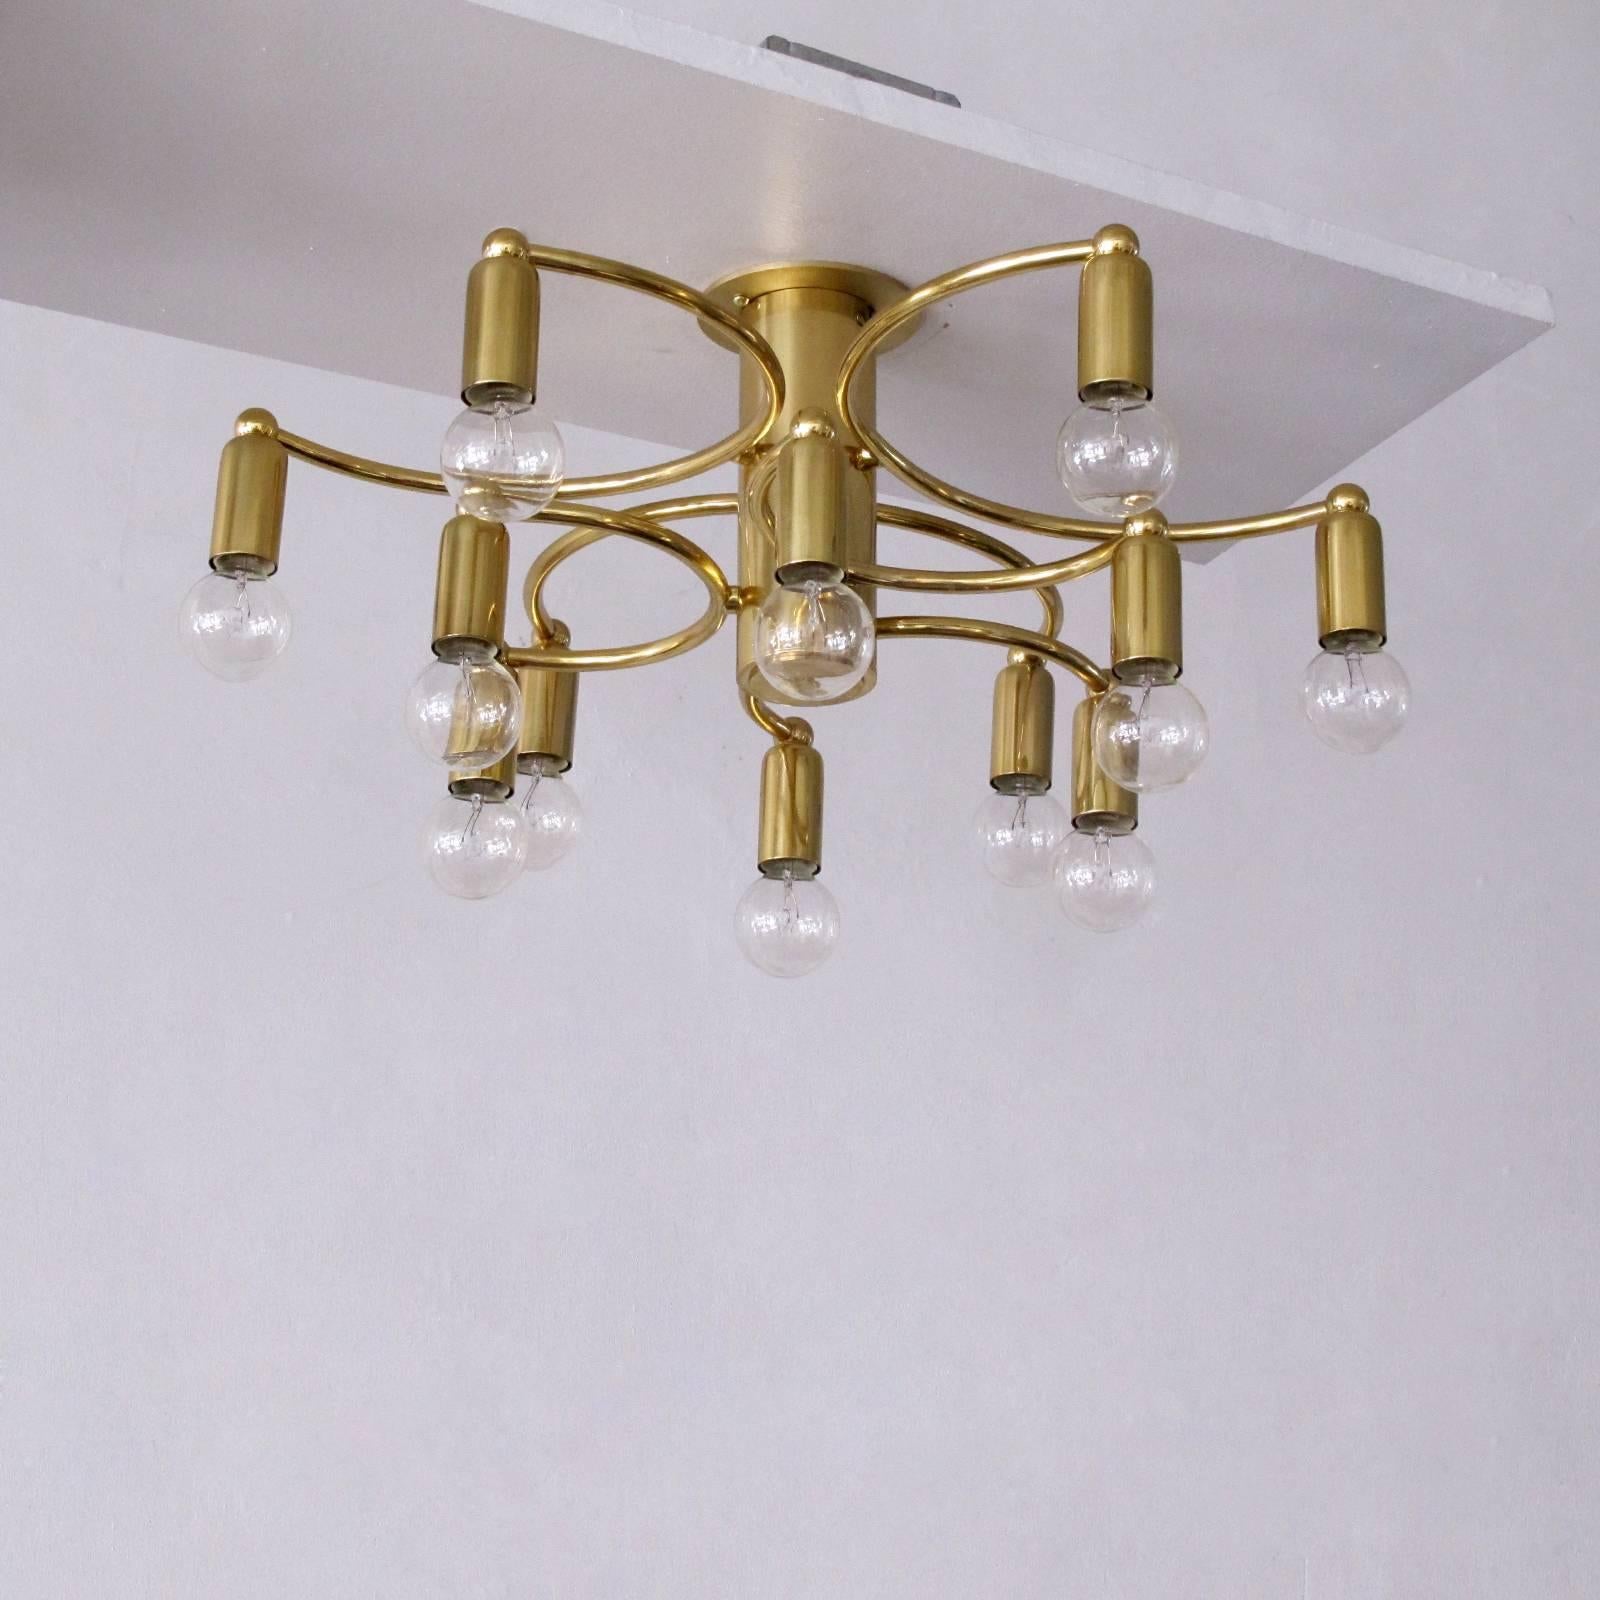 Wonderful brass twelve-light flush mount ceiling light with two tiers of three semi-circular arms, each equipped with two sockets on either end, can be used as wall sconce or ceiling light.